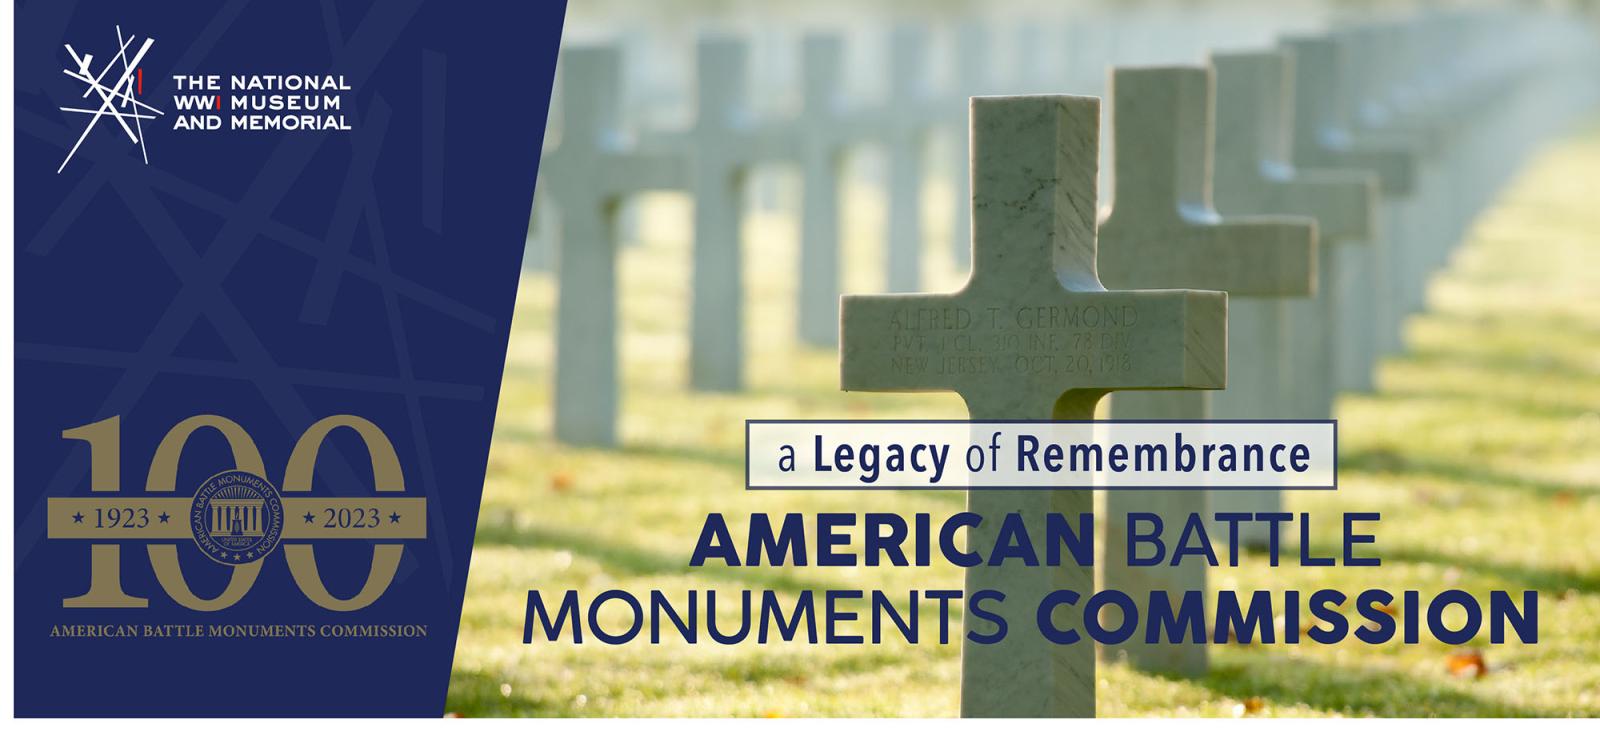 Image: Rows of white stone crosses in an open field shrouded in mist. Text: a Legacy of Remembrance / American Battle Monuments Commission